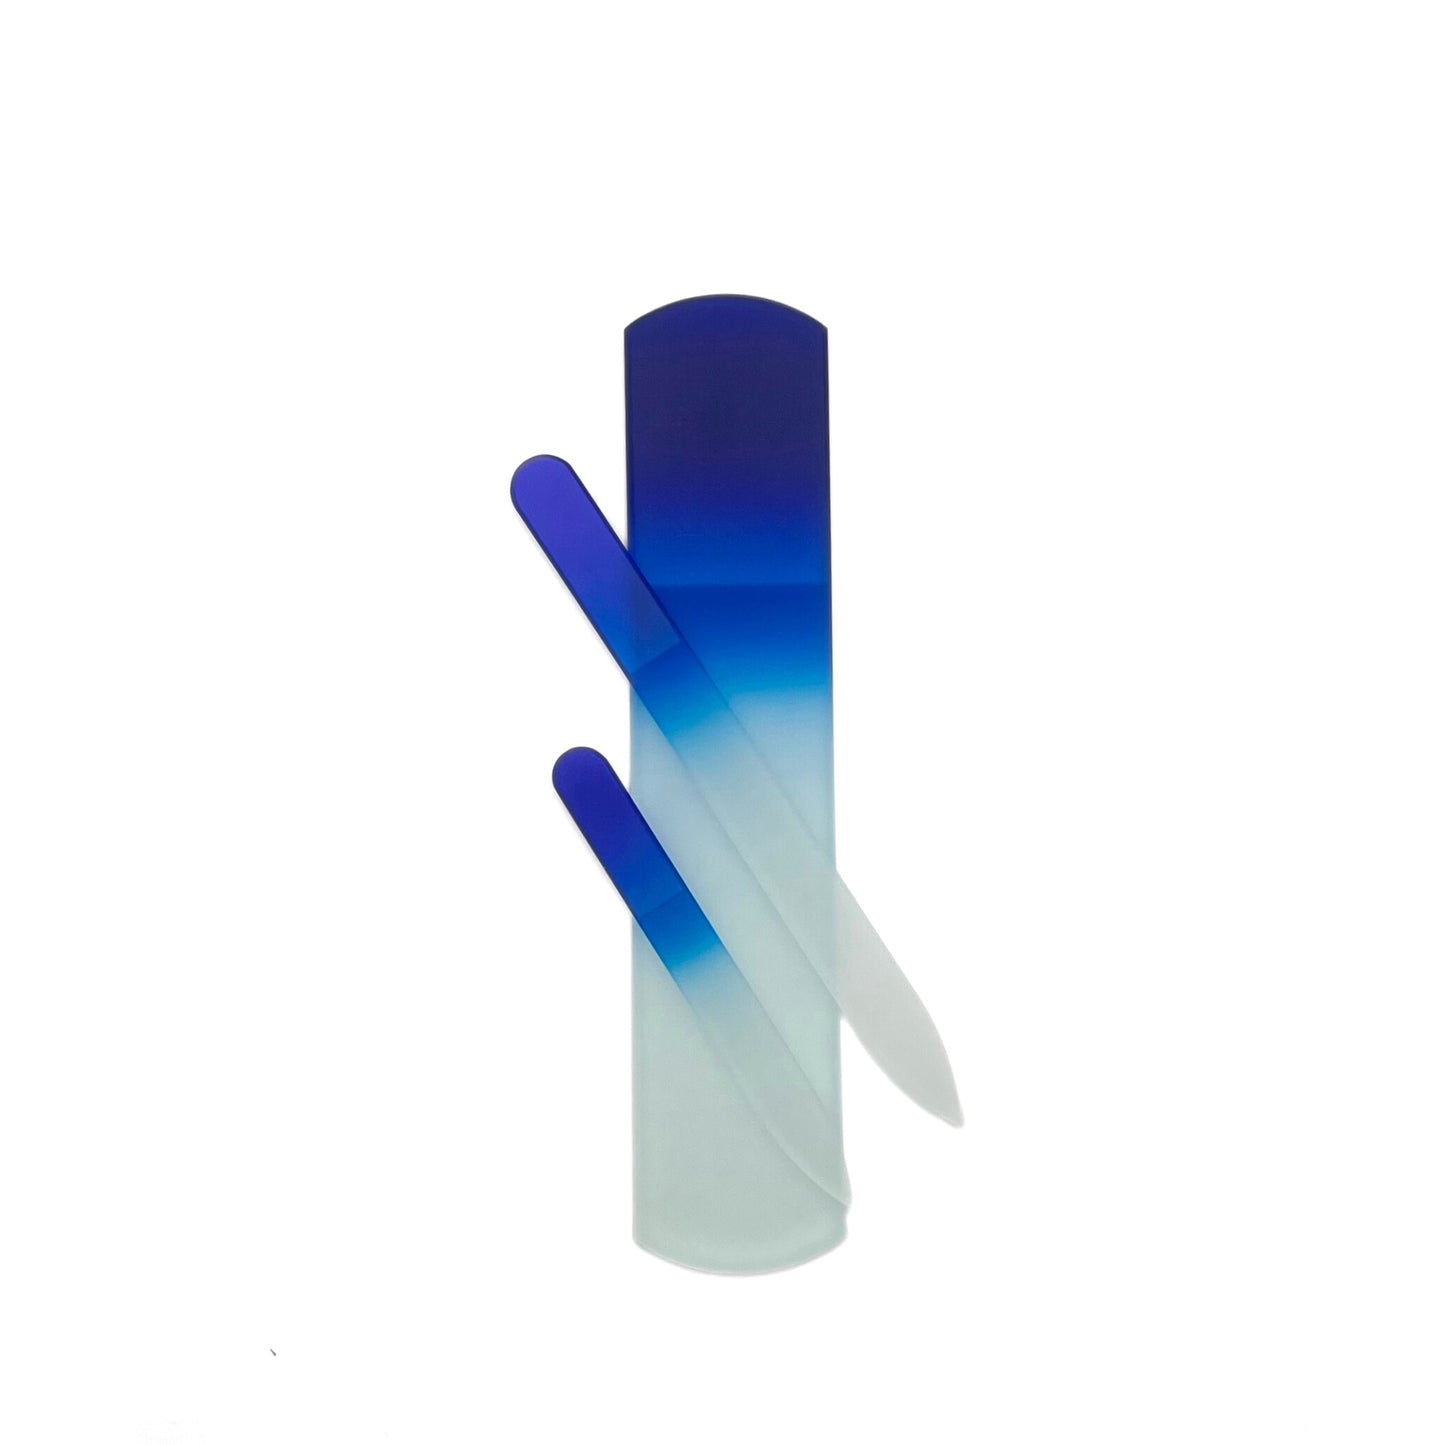 dark blue glass nail file set with a small, medium and foot sized files